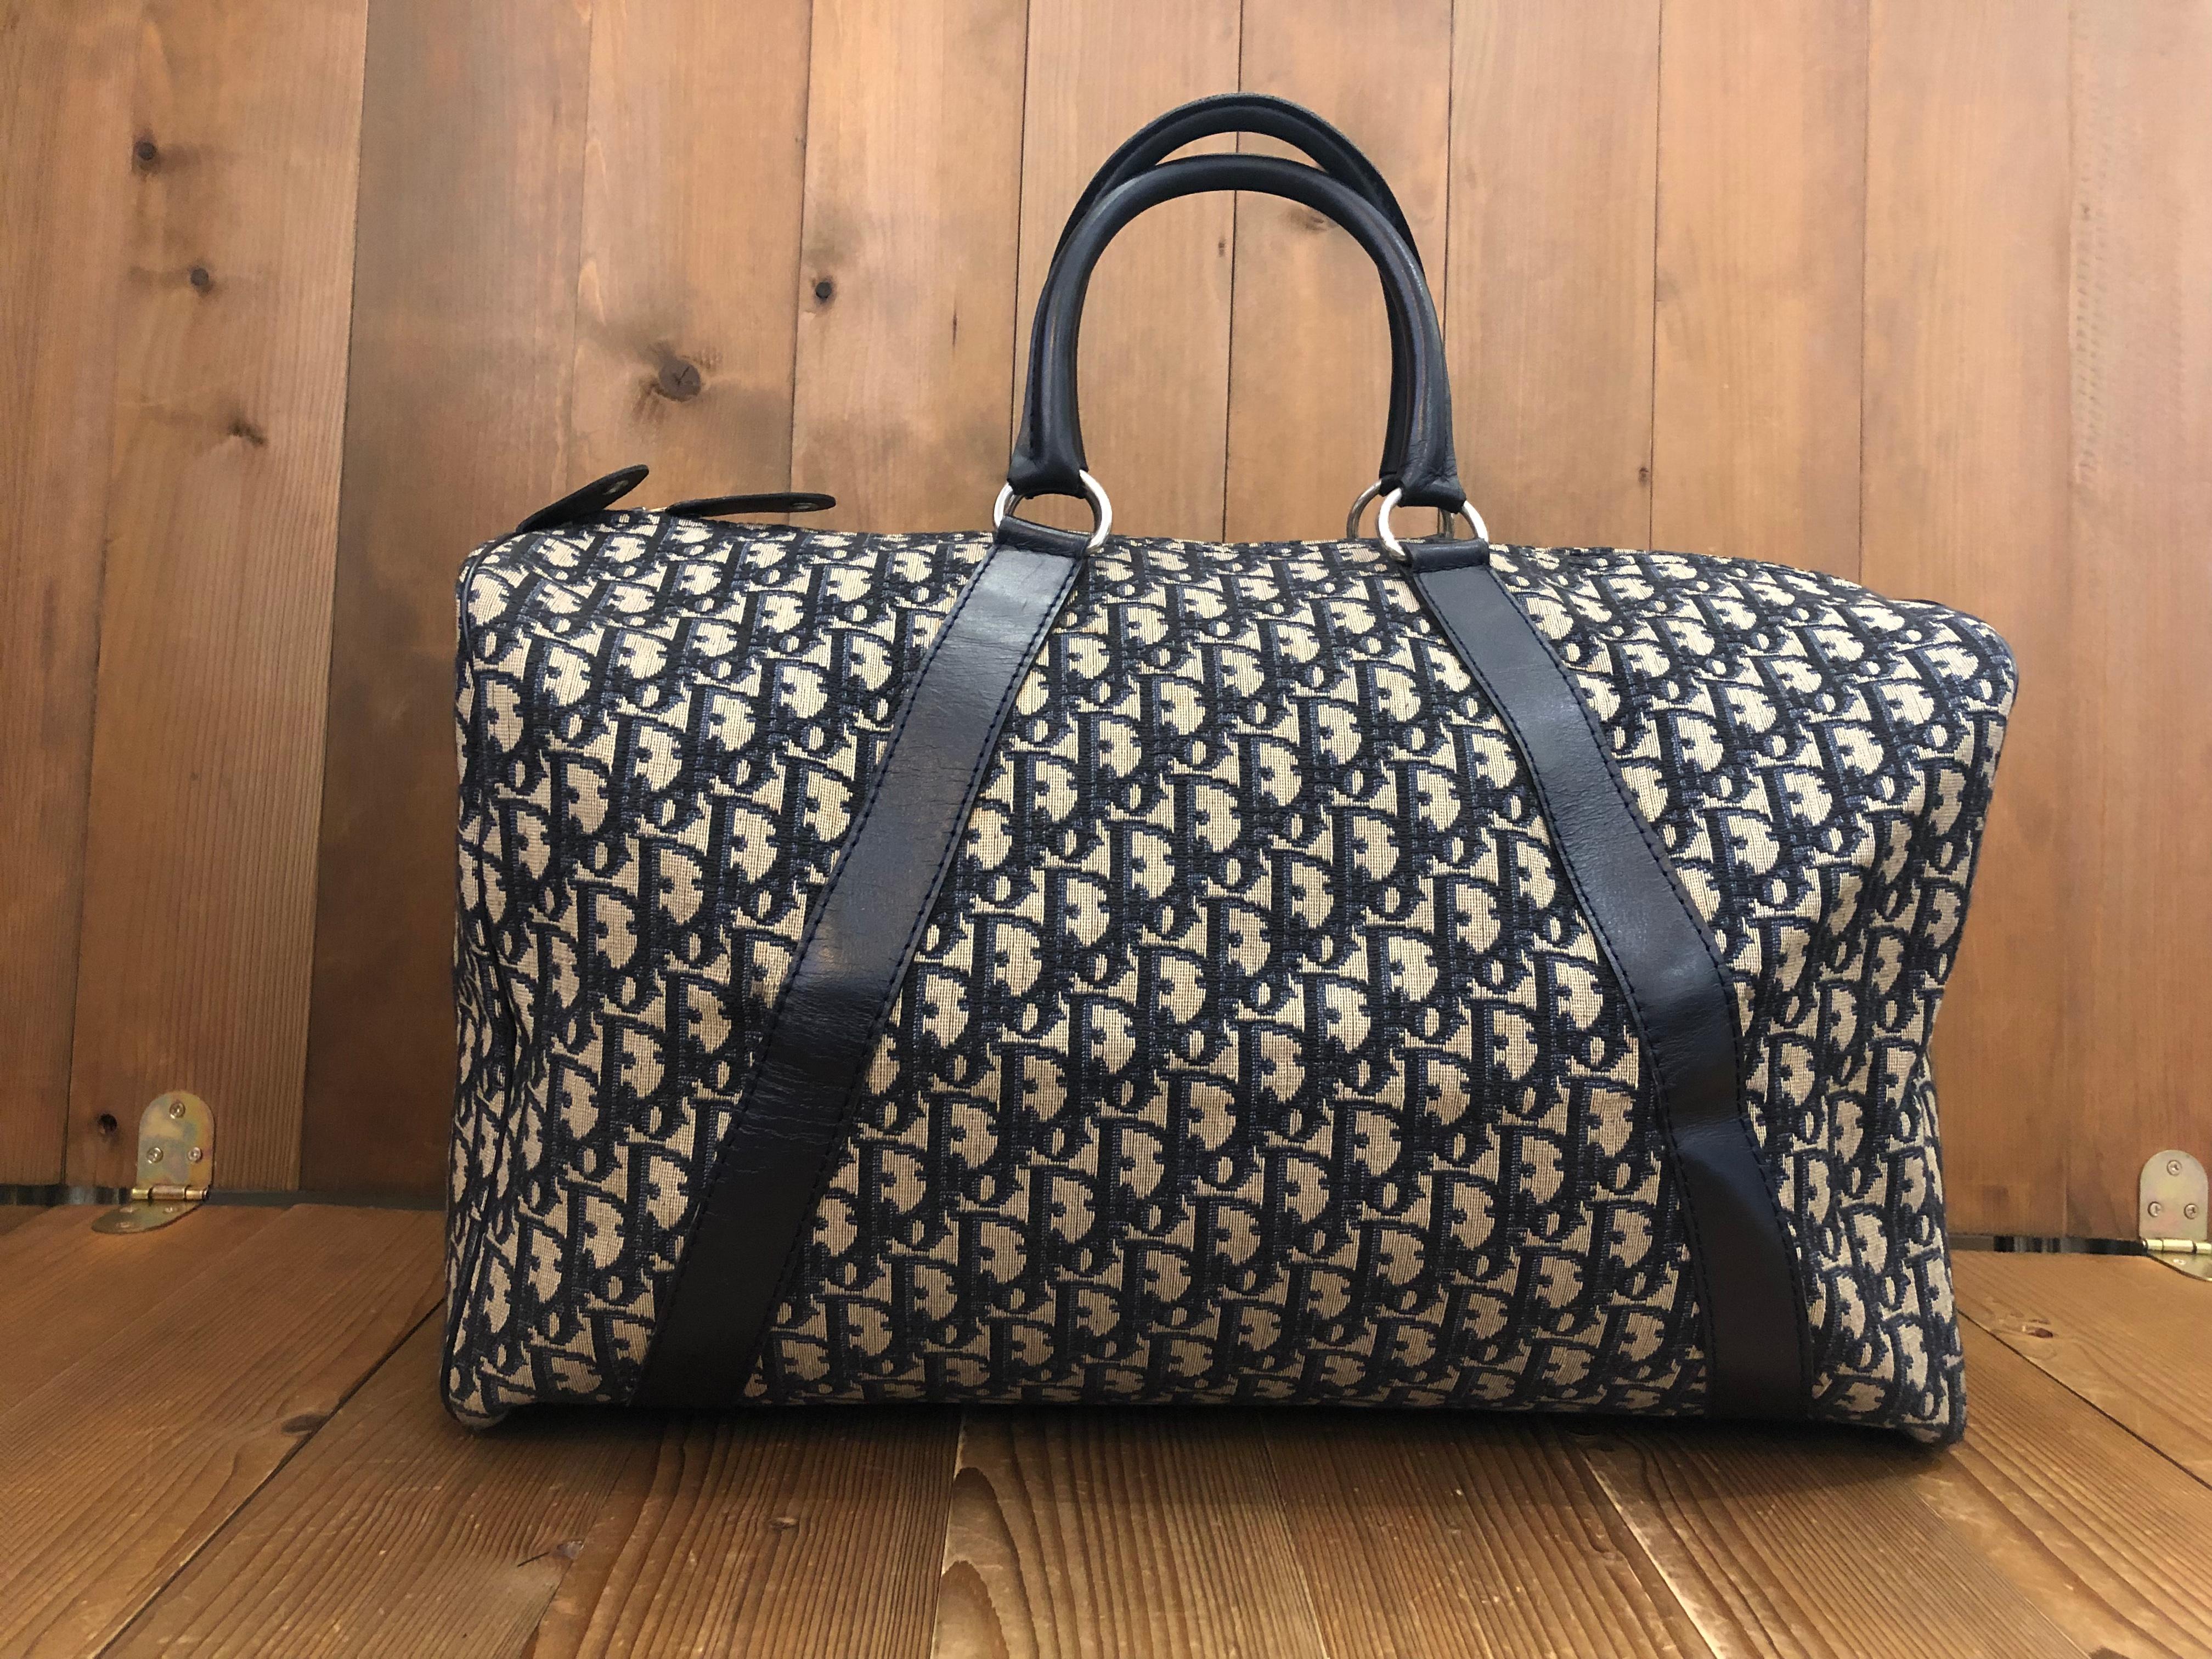 1970s CHRISTIAN DIOR boston duffle bag in navy trotter jacquard and leather trimmings featuring an navy all-leather interior and an interior zip pocket. This is an ideal duffle for a weekend getaway. Made in France. Measures approximately 18 x 11 x